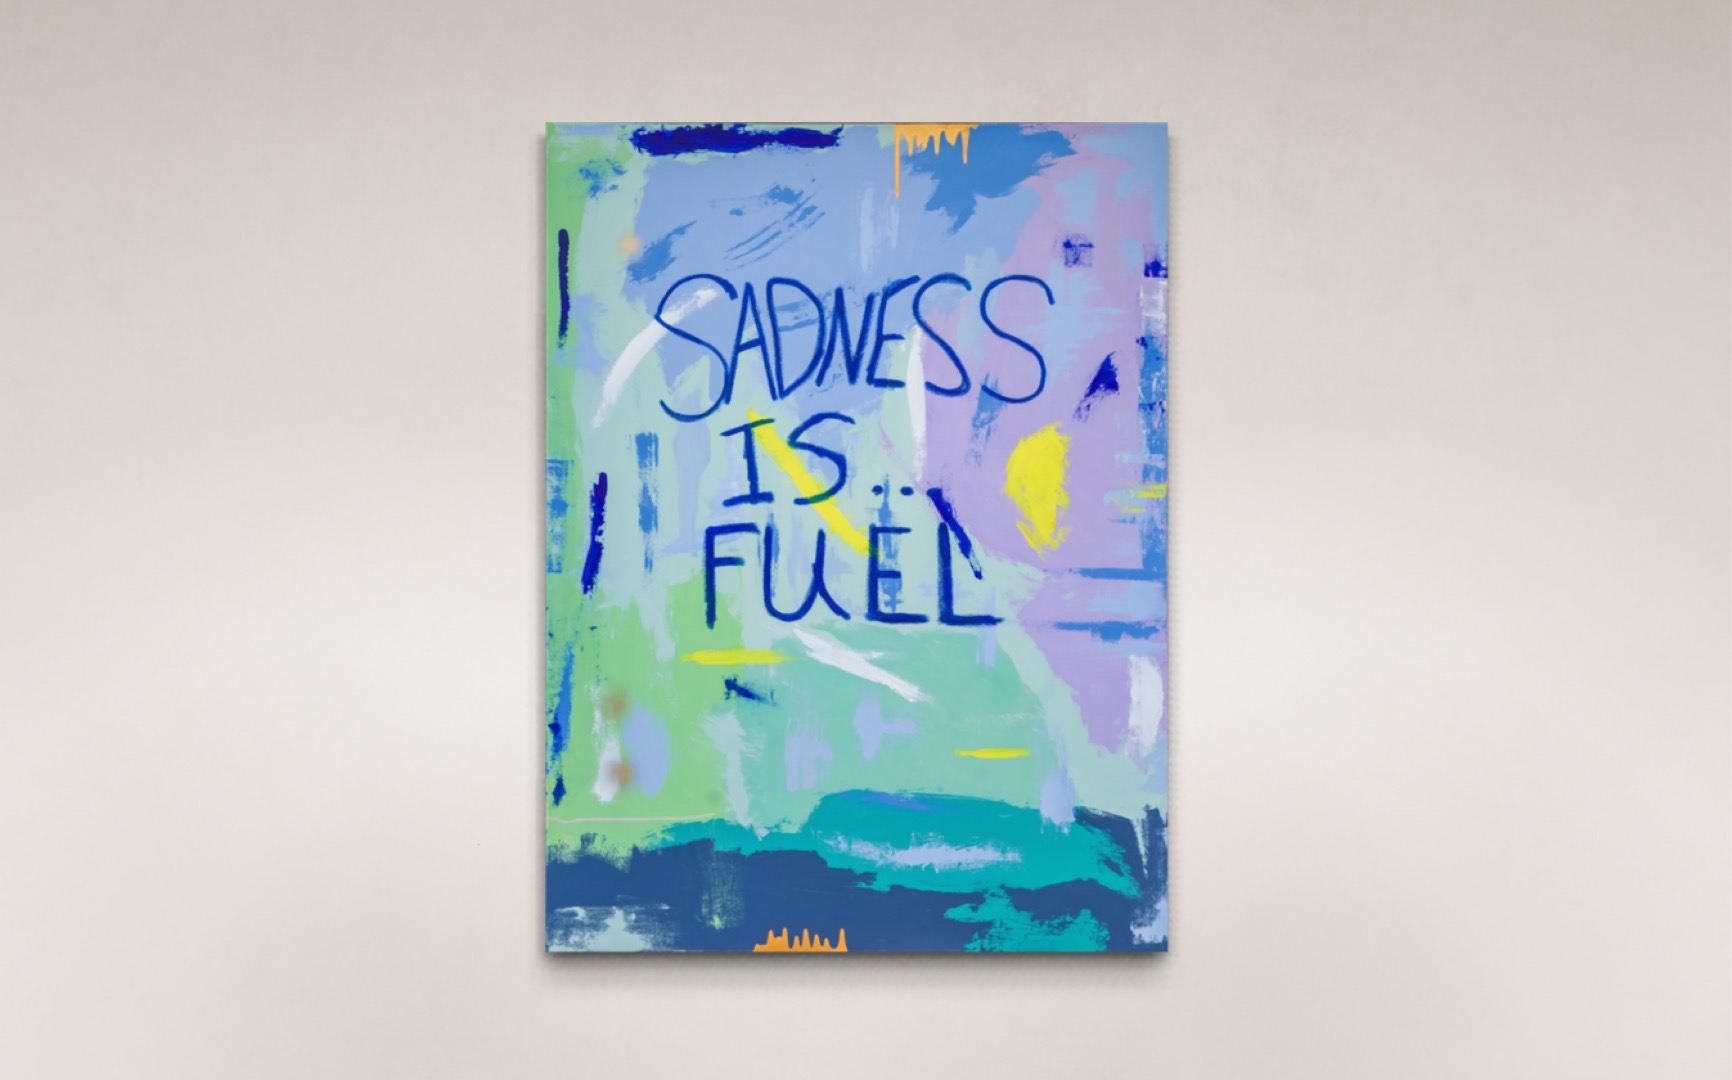 Sadness Is Fuel acrylic on canvas with oil stick art for sale by Uzoma Obasi